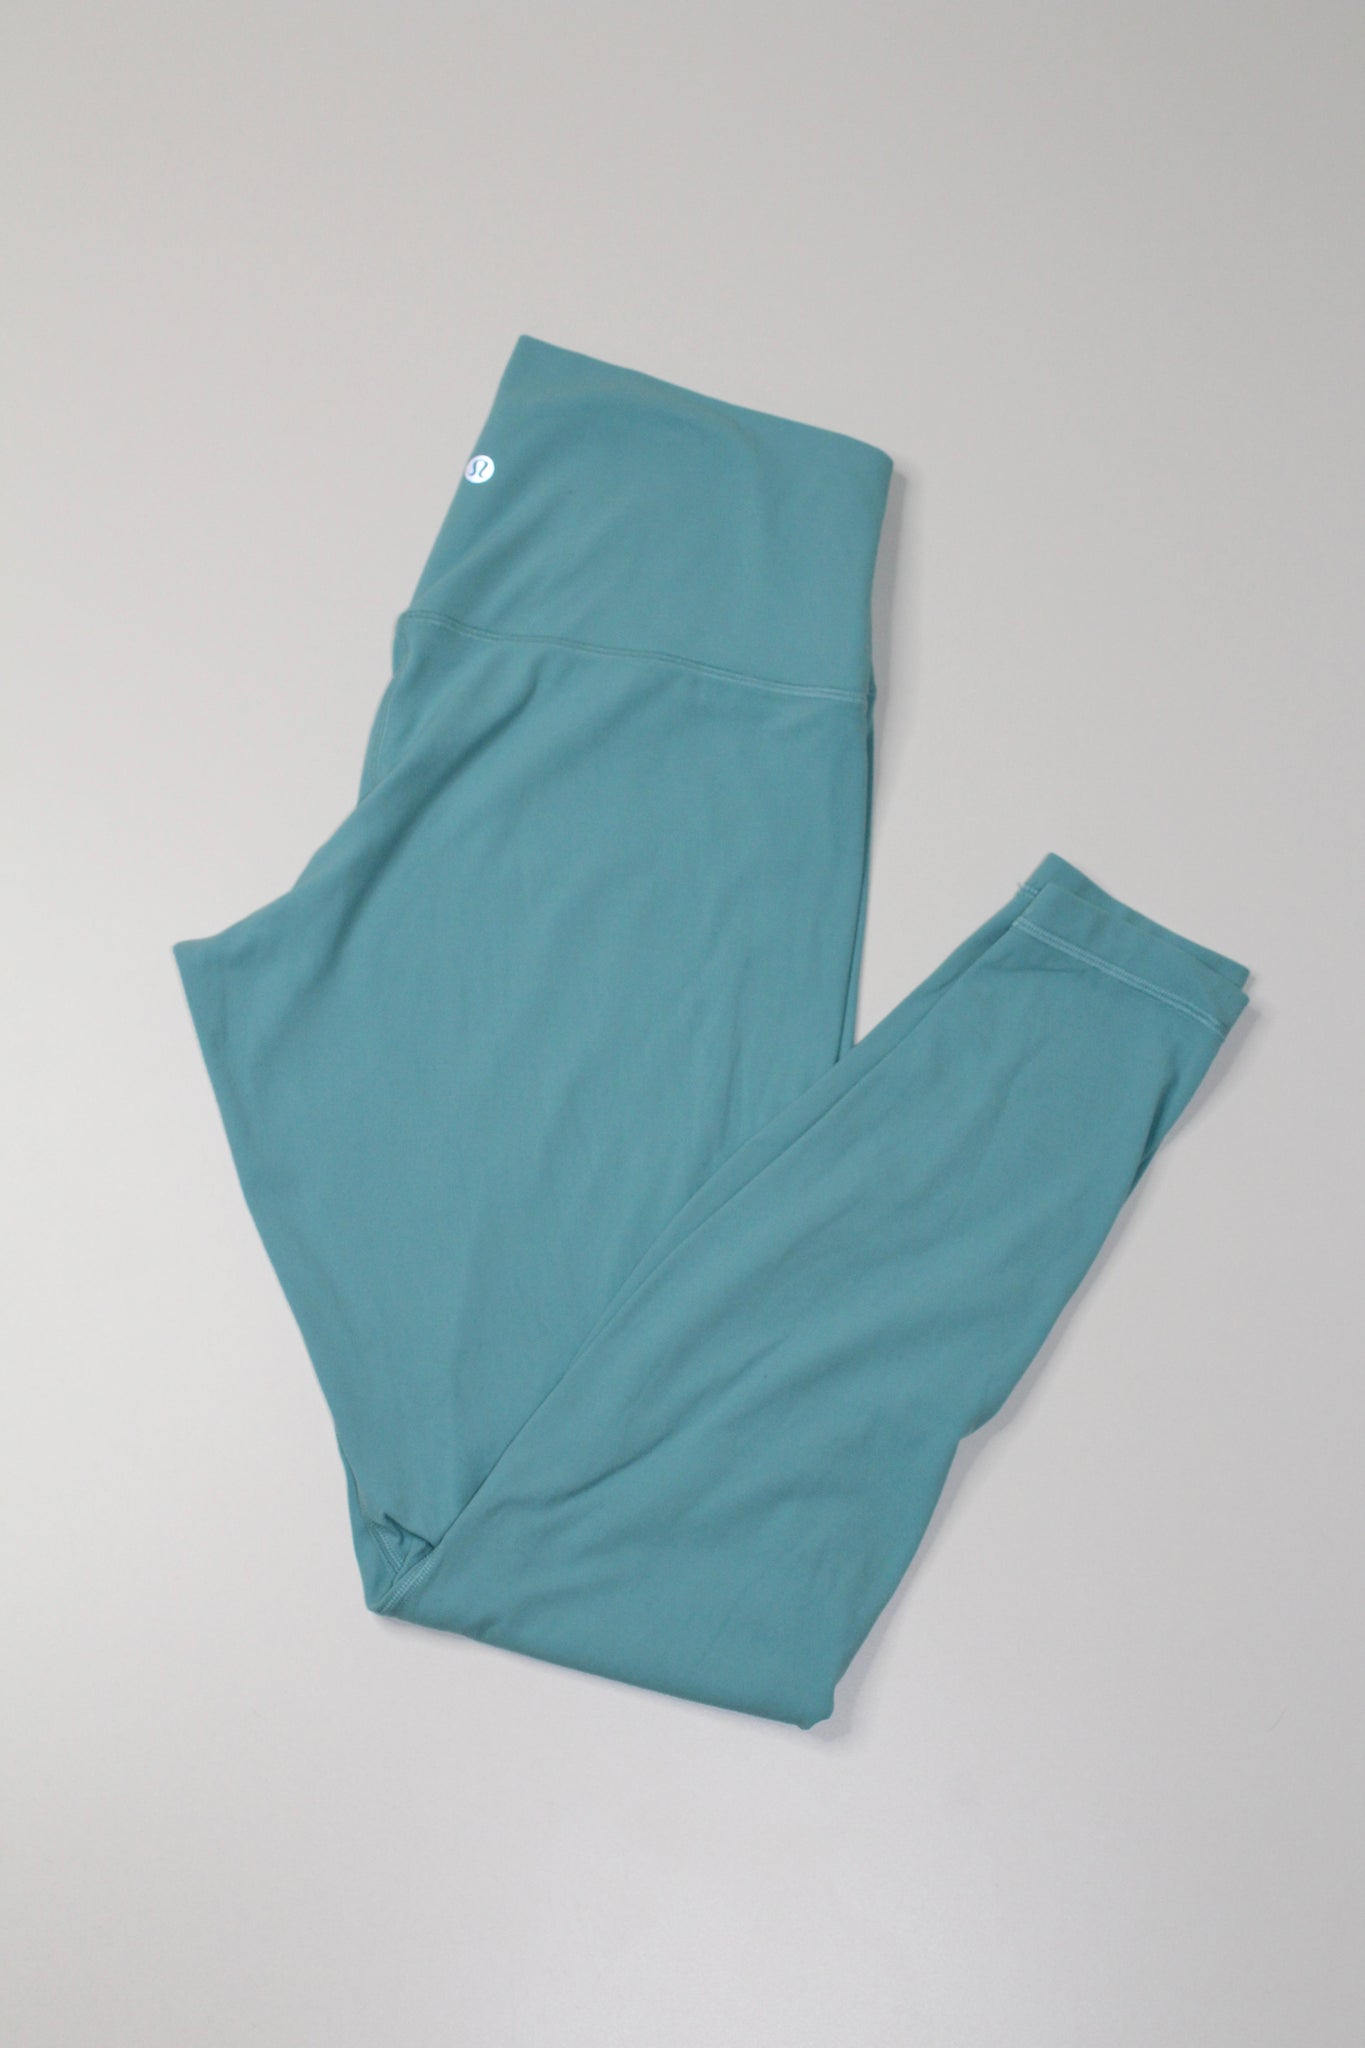 Lululemon align pant, size 12 (28”) (price reduced: was $58